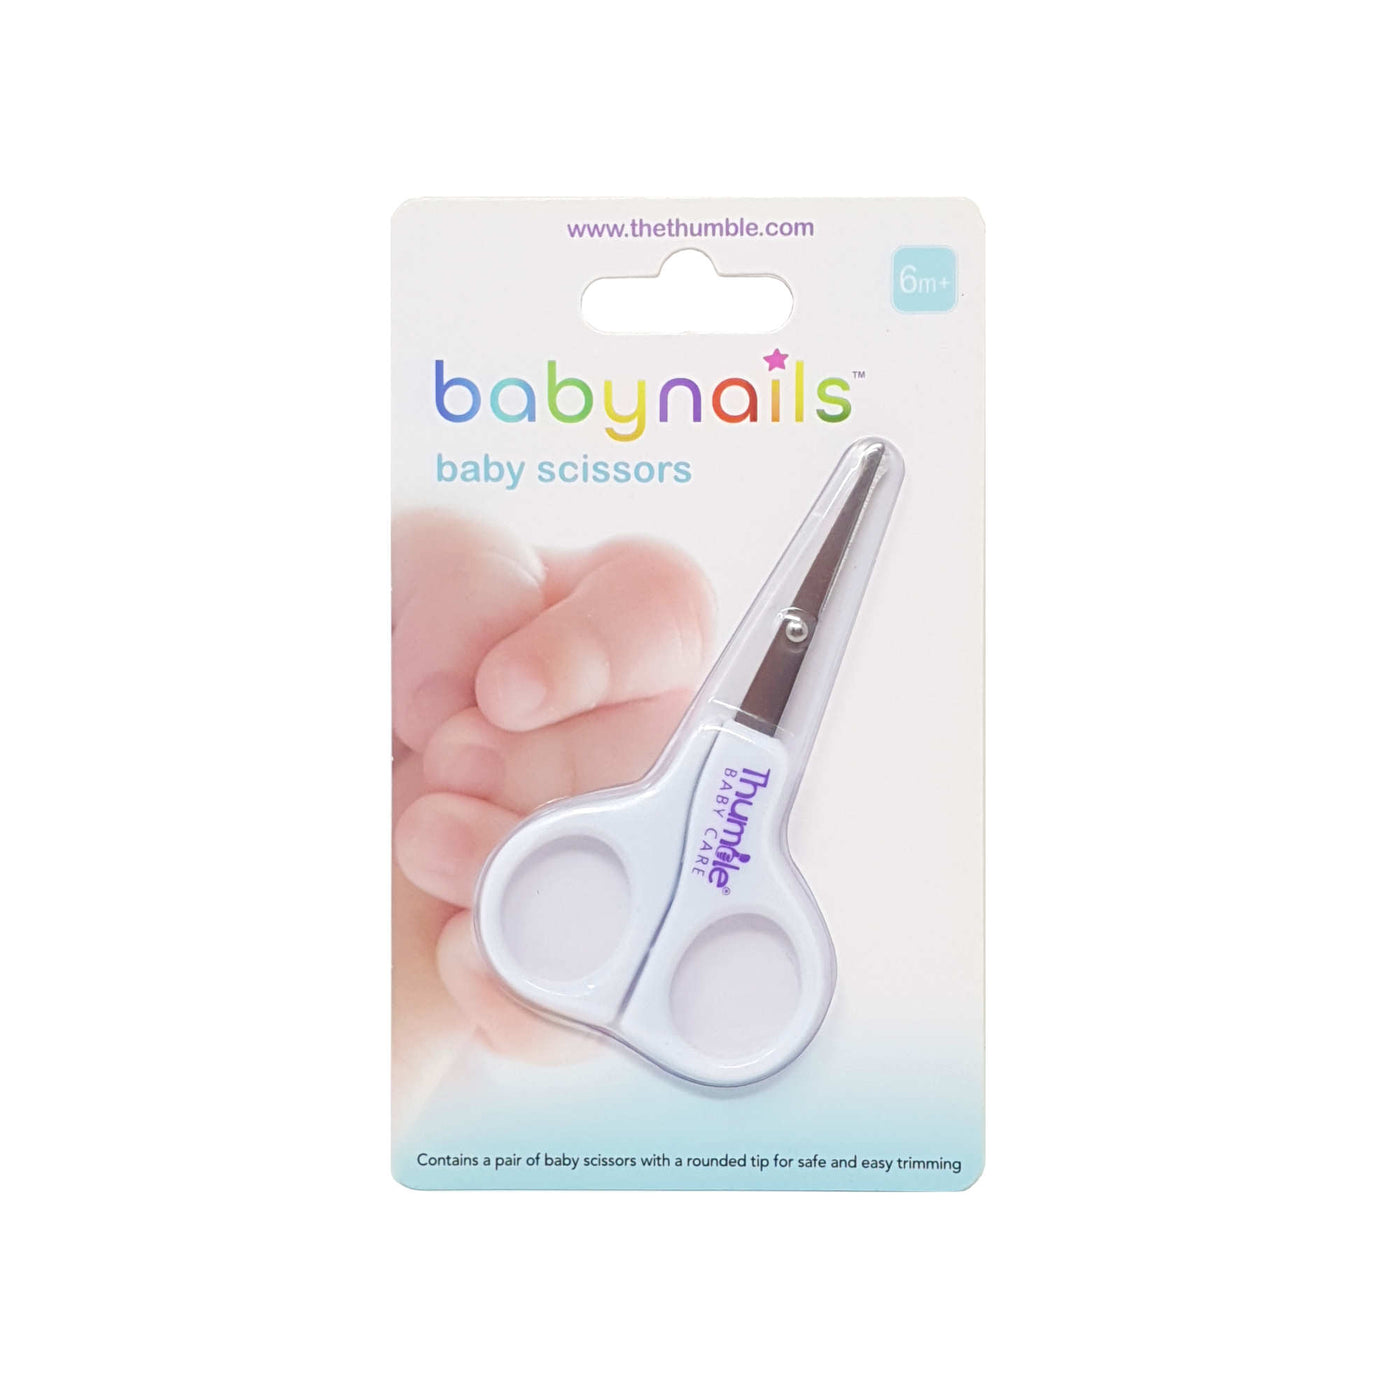 Baby Scissors with Rounded Tips â€“ Safe Trimming of Newborn and Baby Nails  â€“ No Poke Manicure Scissors for Nose, Ear, and Facial Grooming